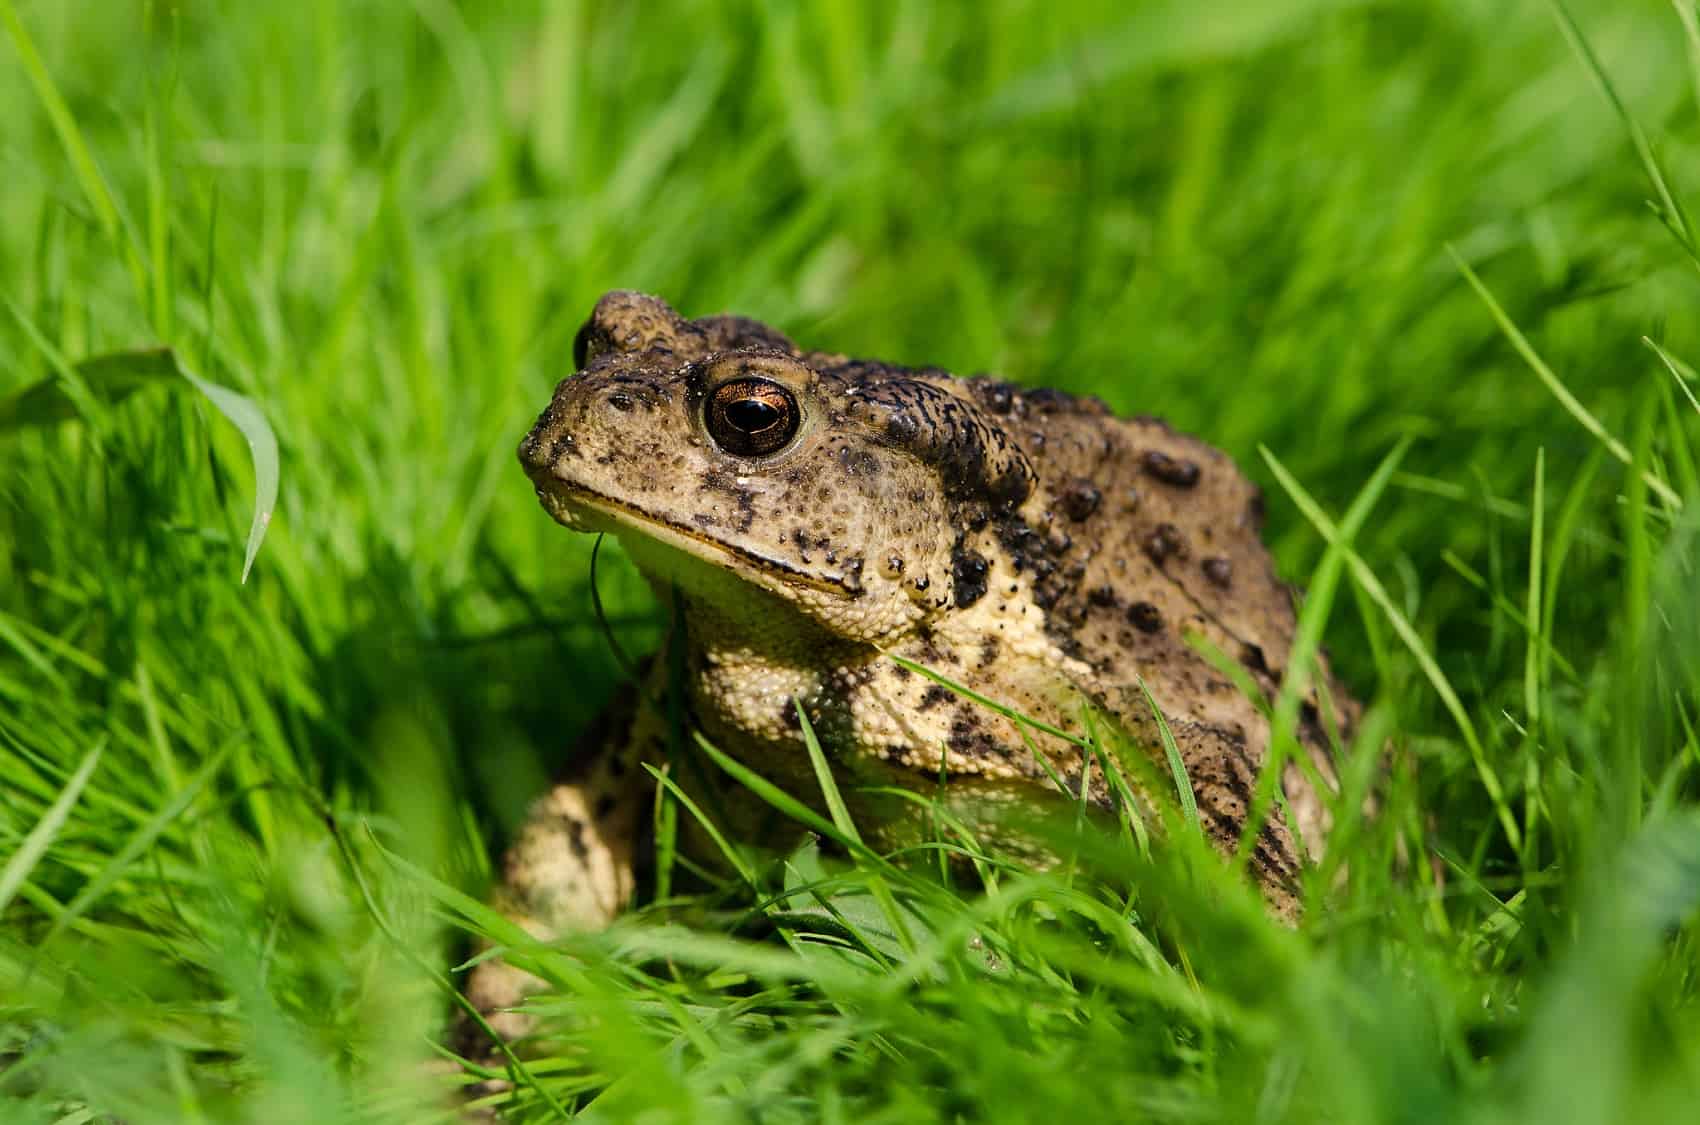 Toad in grass.